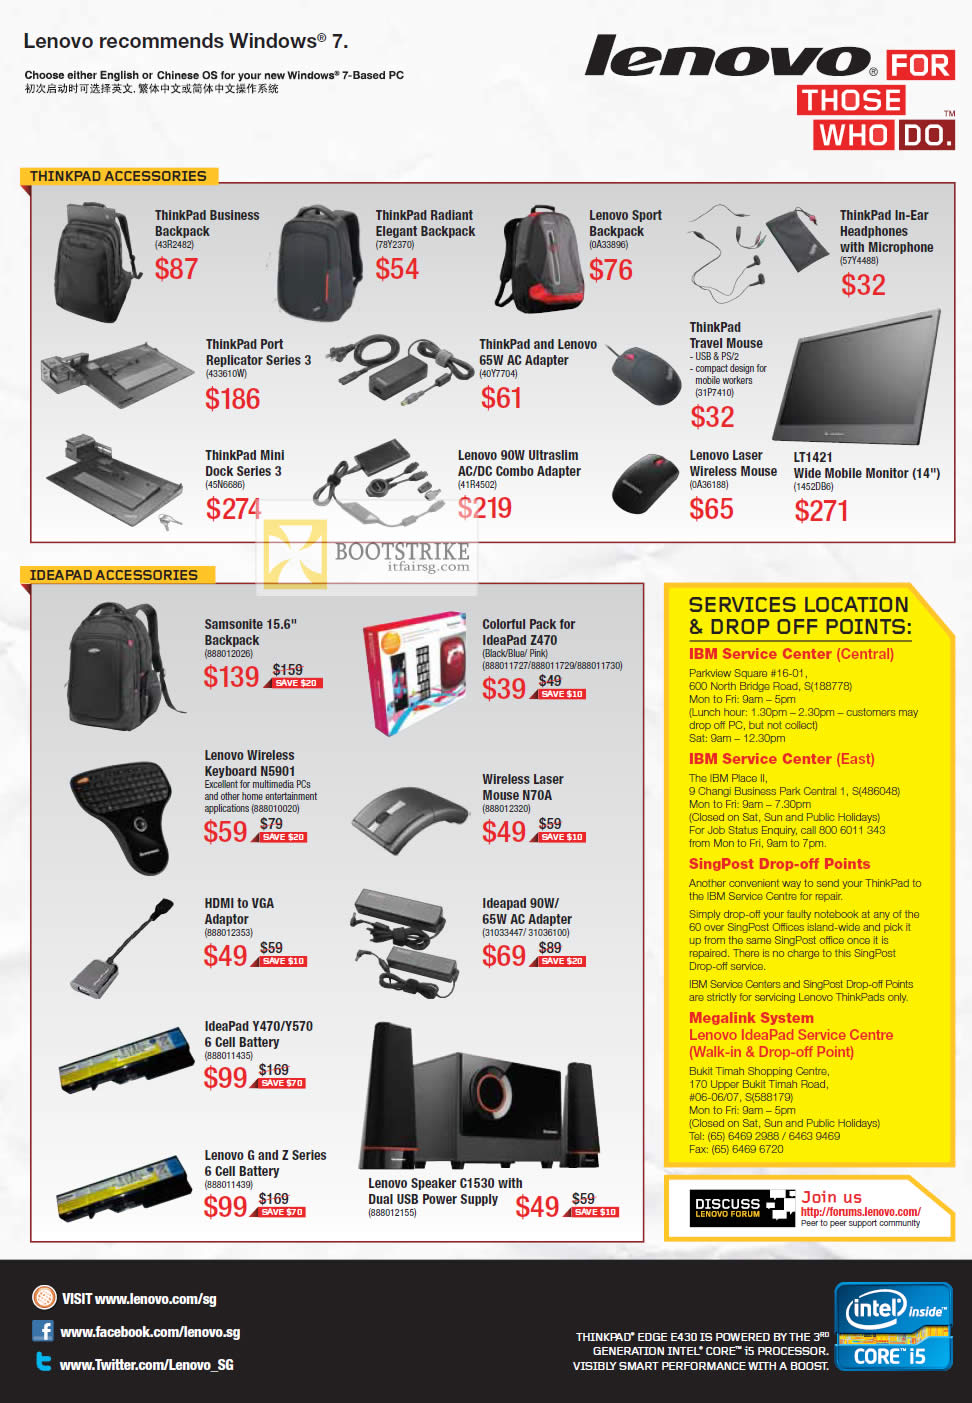 PC SHOW 2012 price list image brochure of Lenovo Accessories Thinkpad Backpack, Headphones, Mouse, Power Adapter, Mouse, Samsonite, HDMI VGA, Battery, Speaker